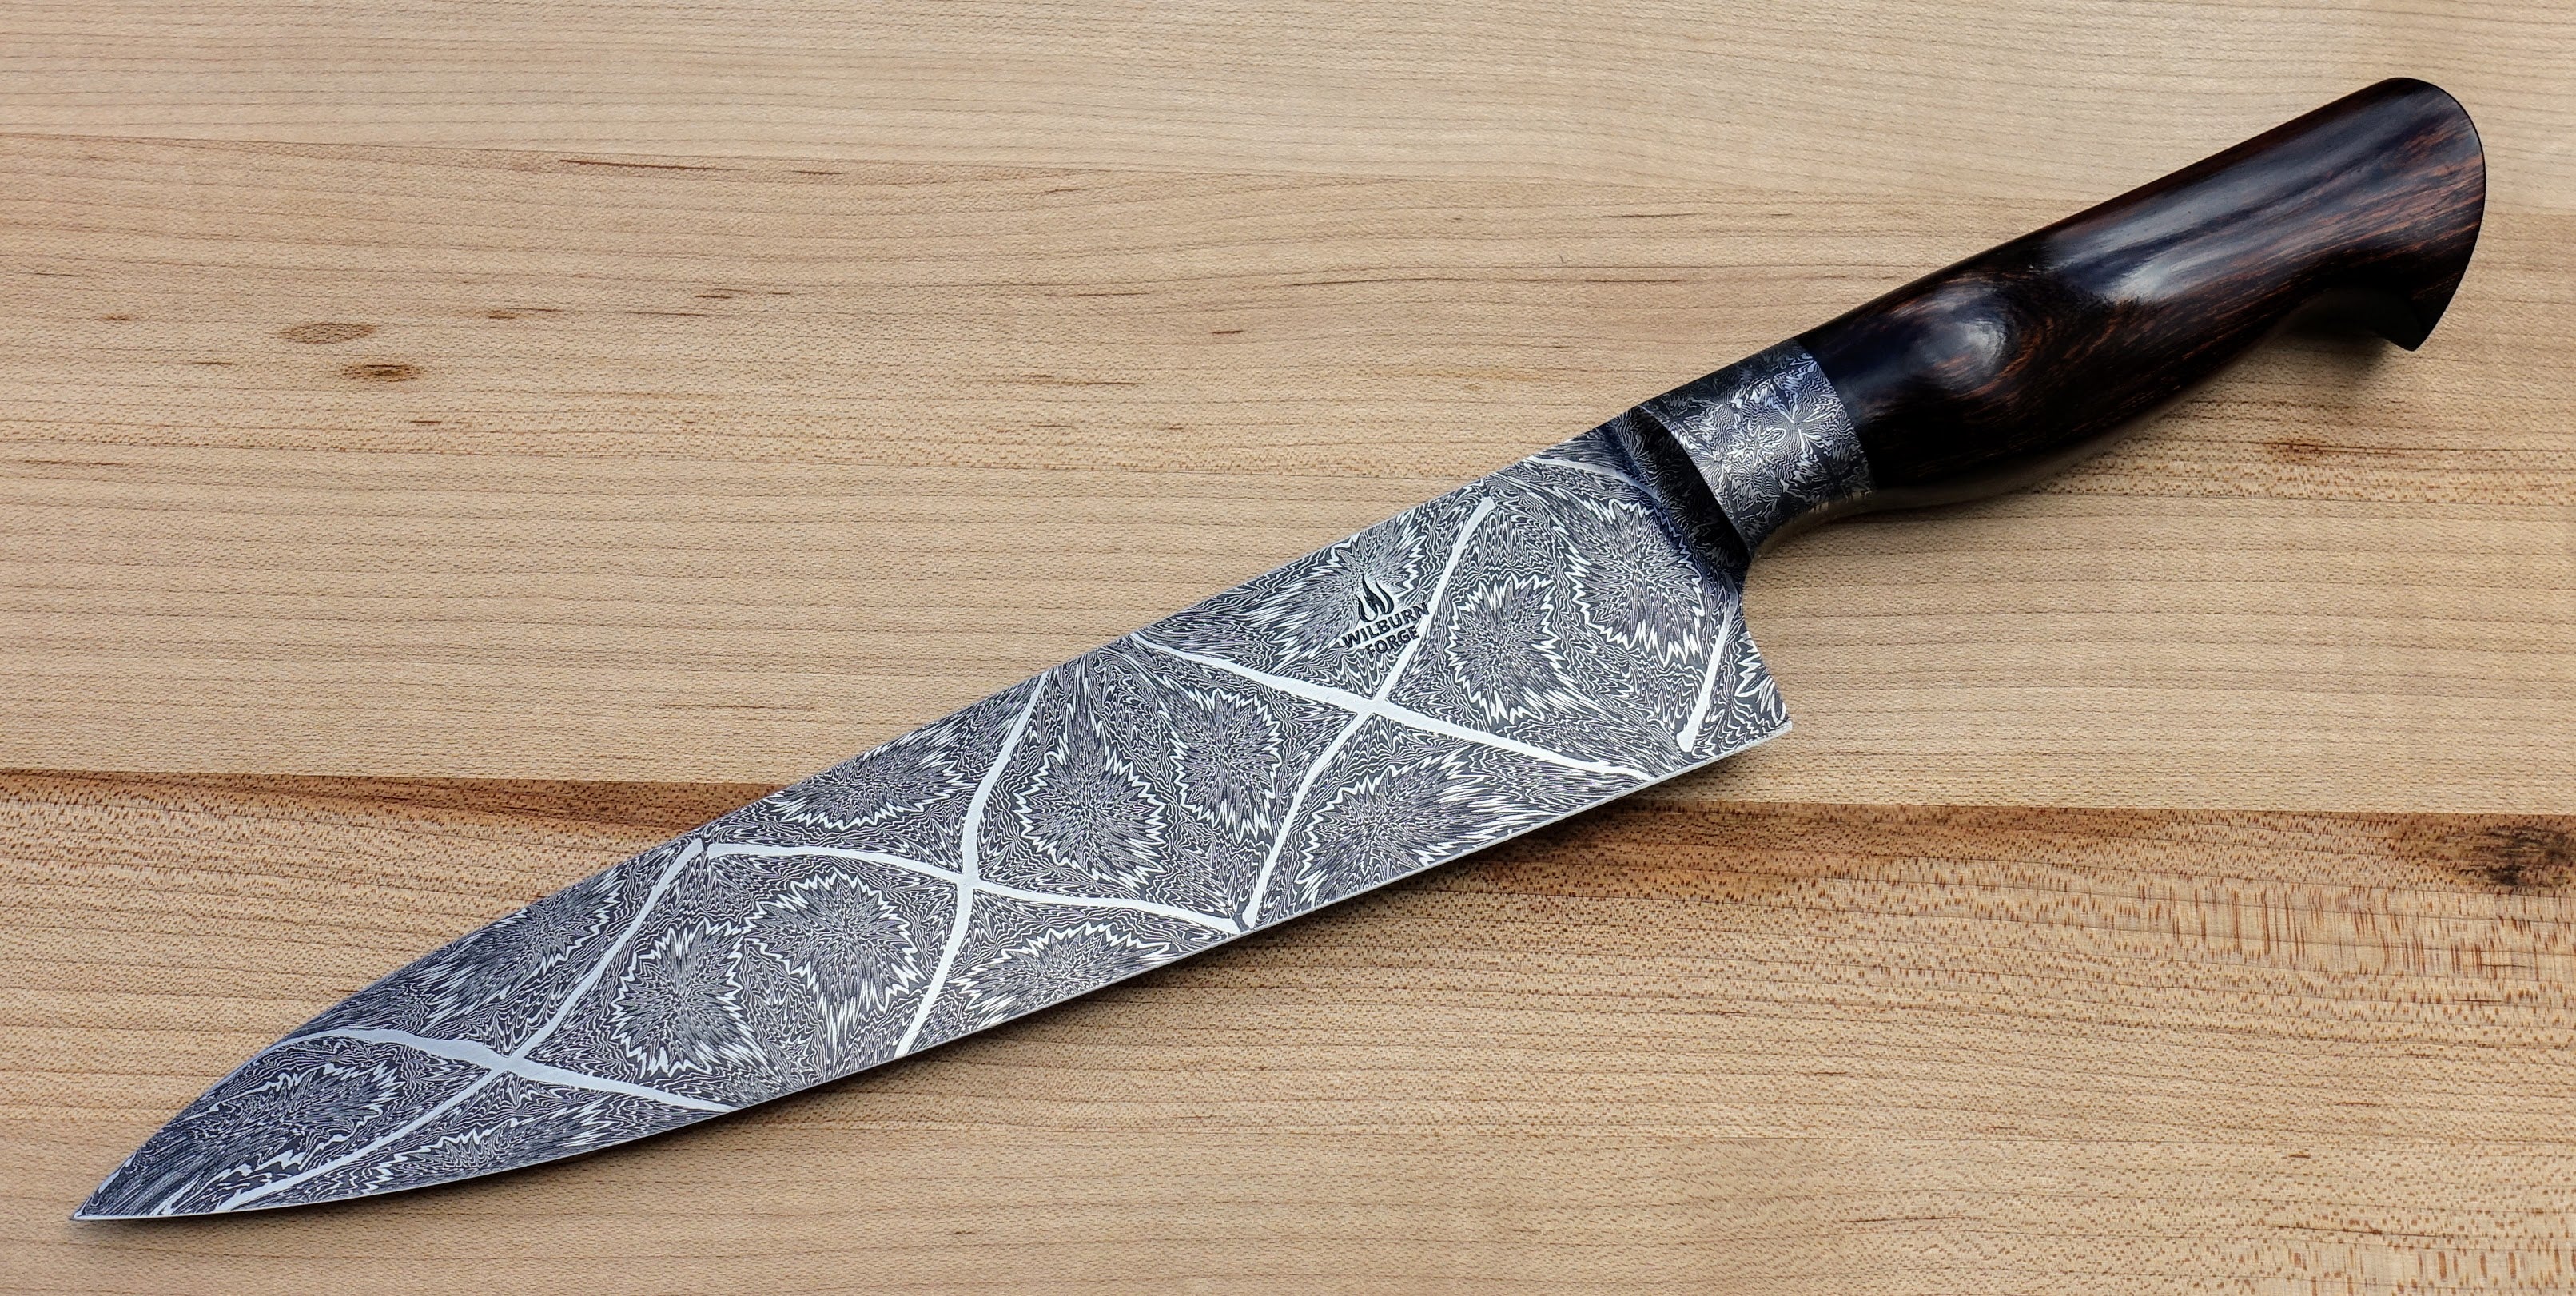 A beautiful big chef's knife made by - Blackberry forge